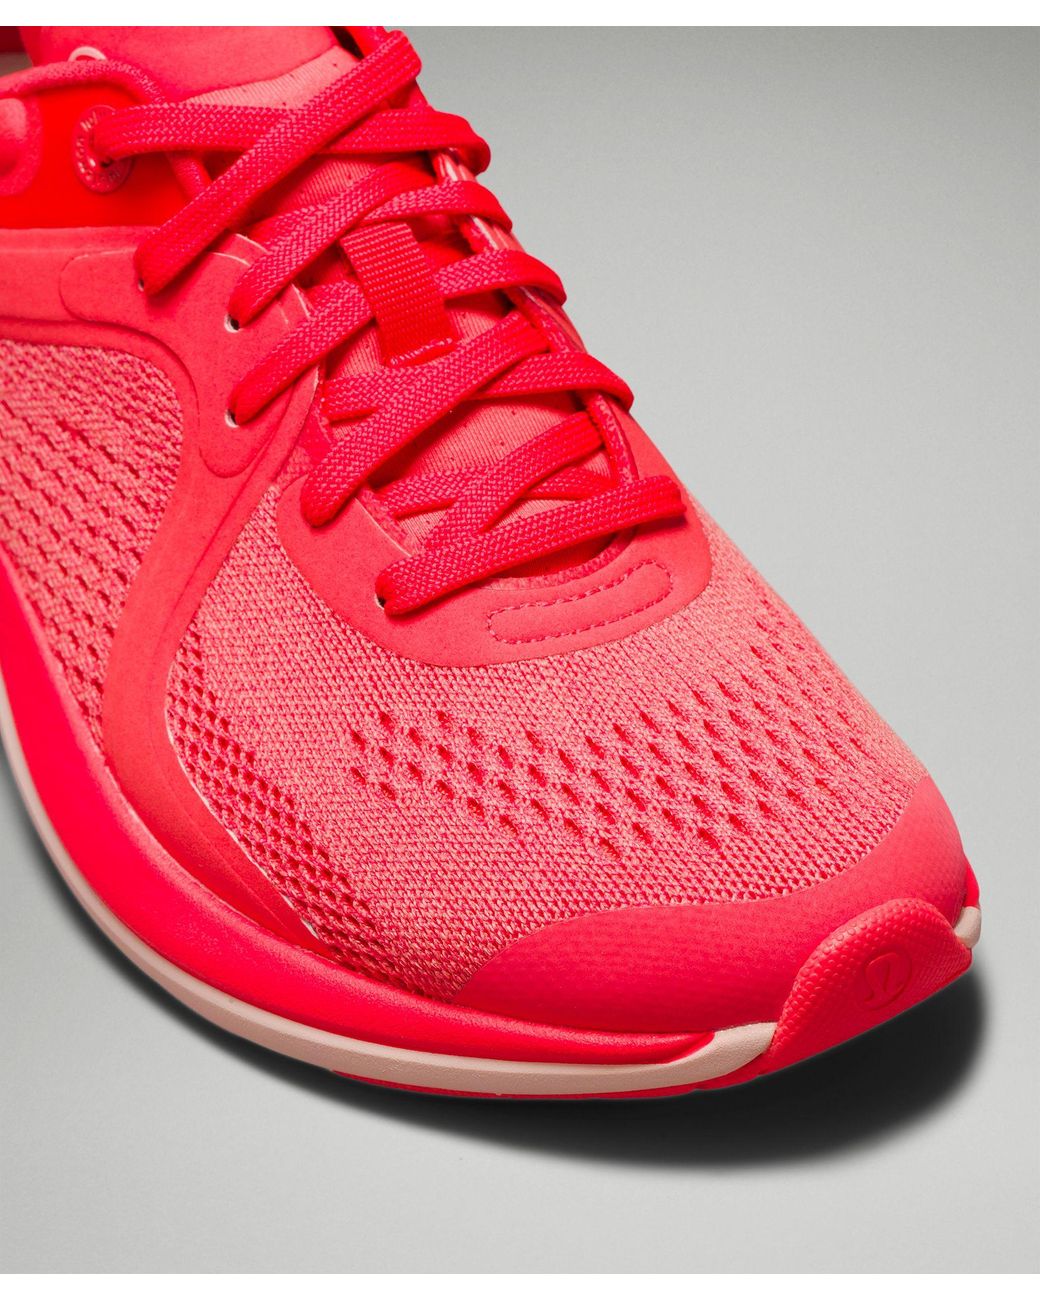 lululemon athletica Chargefeel Low Workout Shoe in Red | Lyst